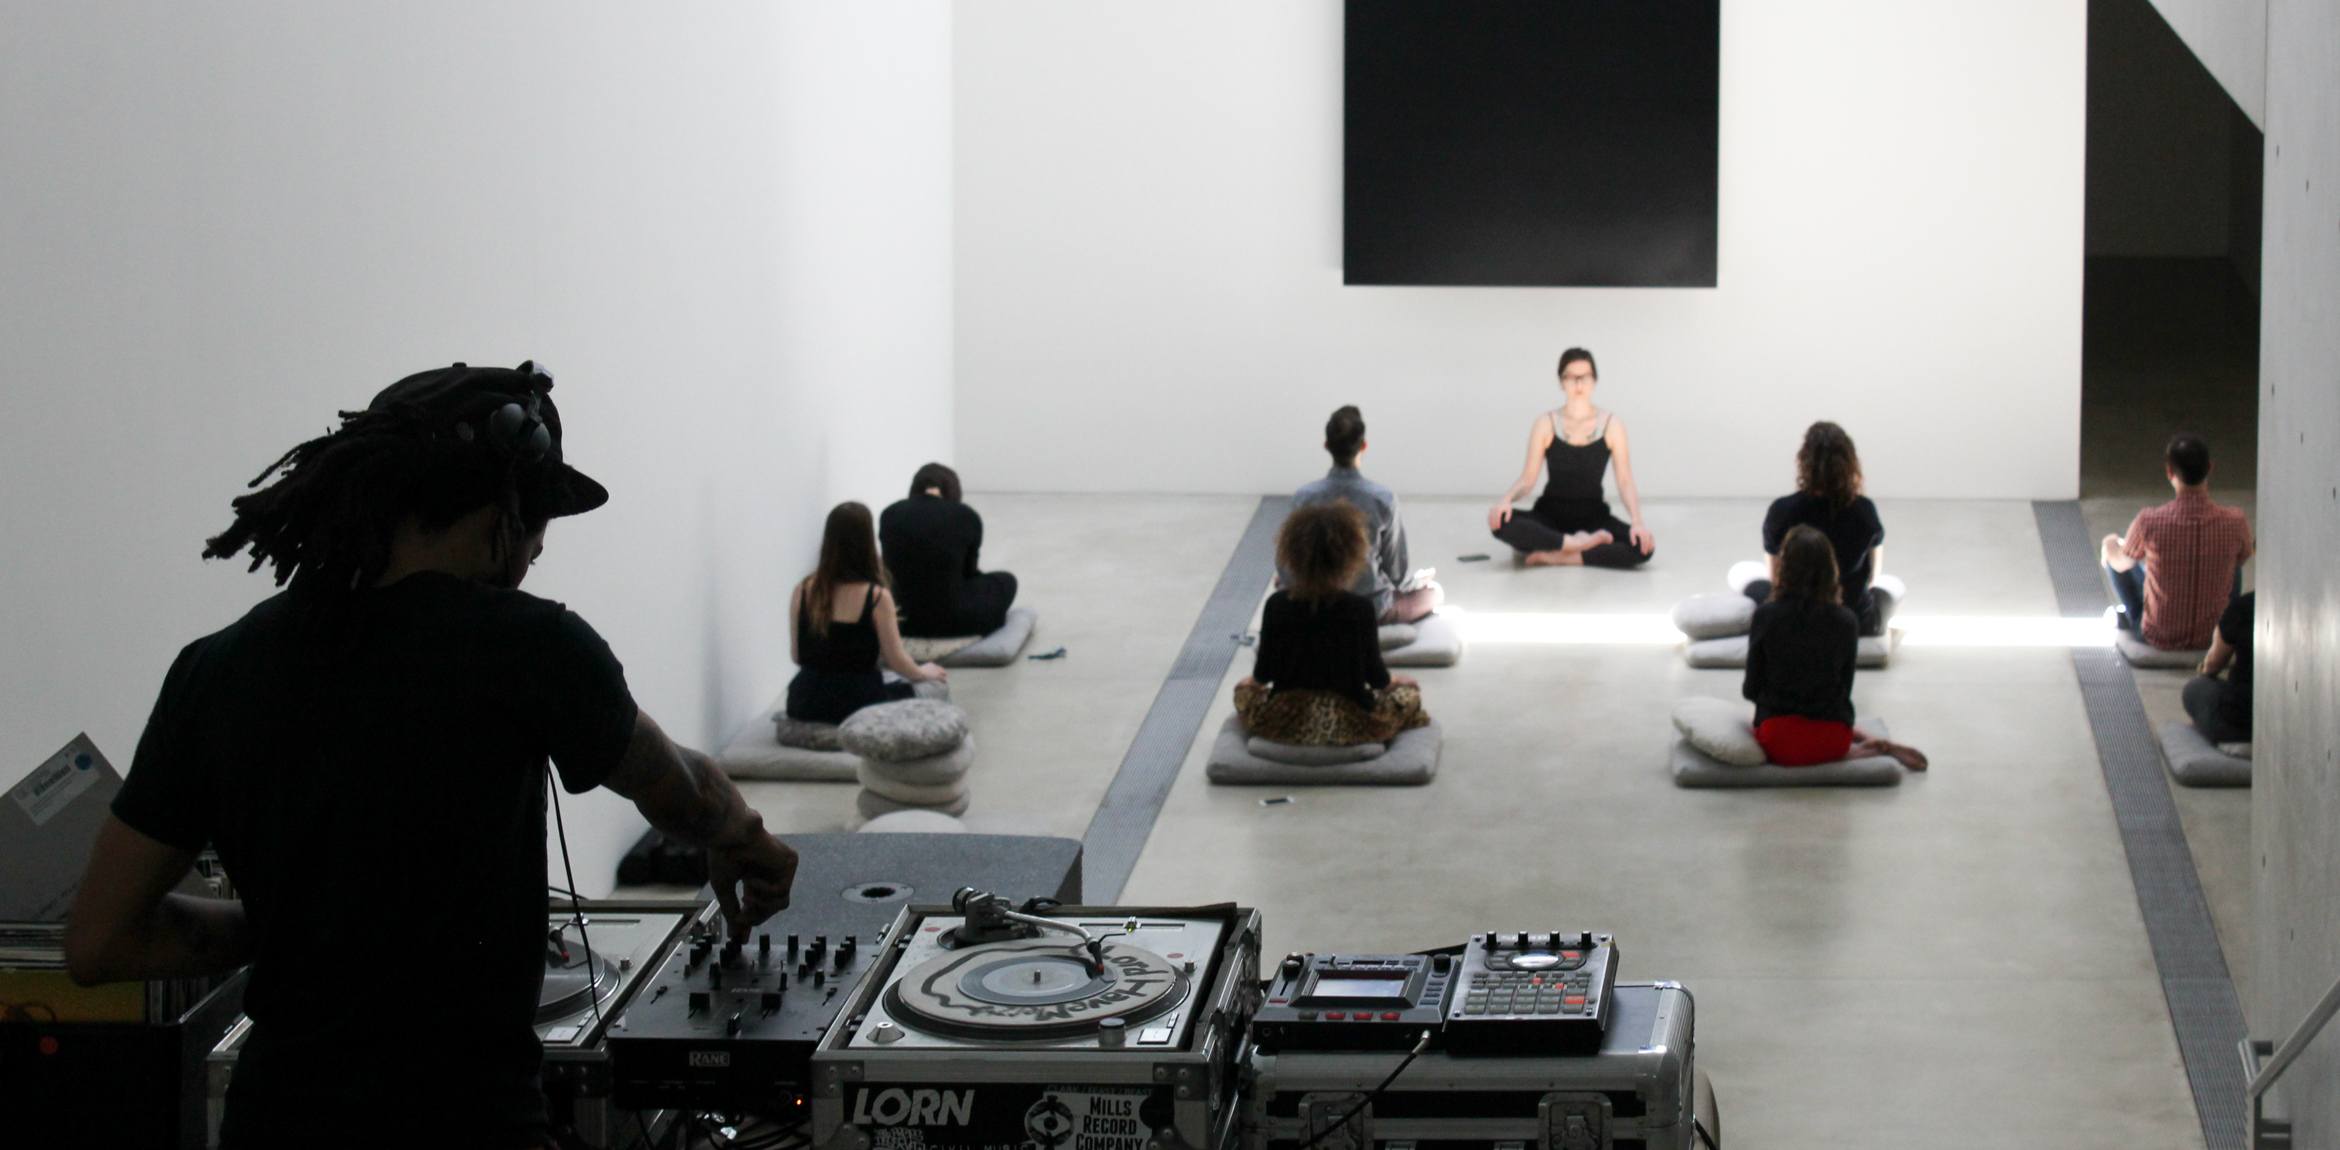 A DJ plays music on the Main Staircase as yoga instructor leads a group of people seated on pillows, in front of Ellsworth Kelly's 